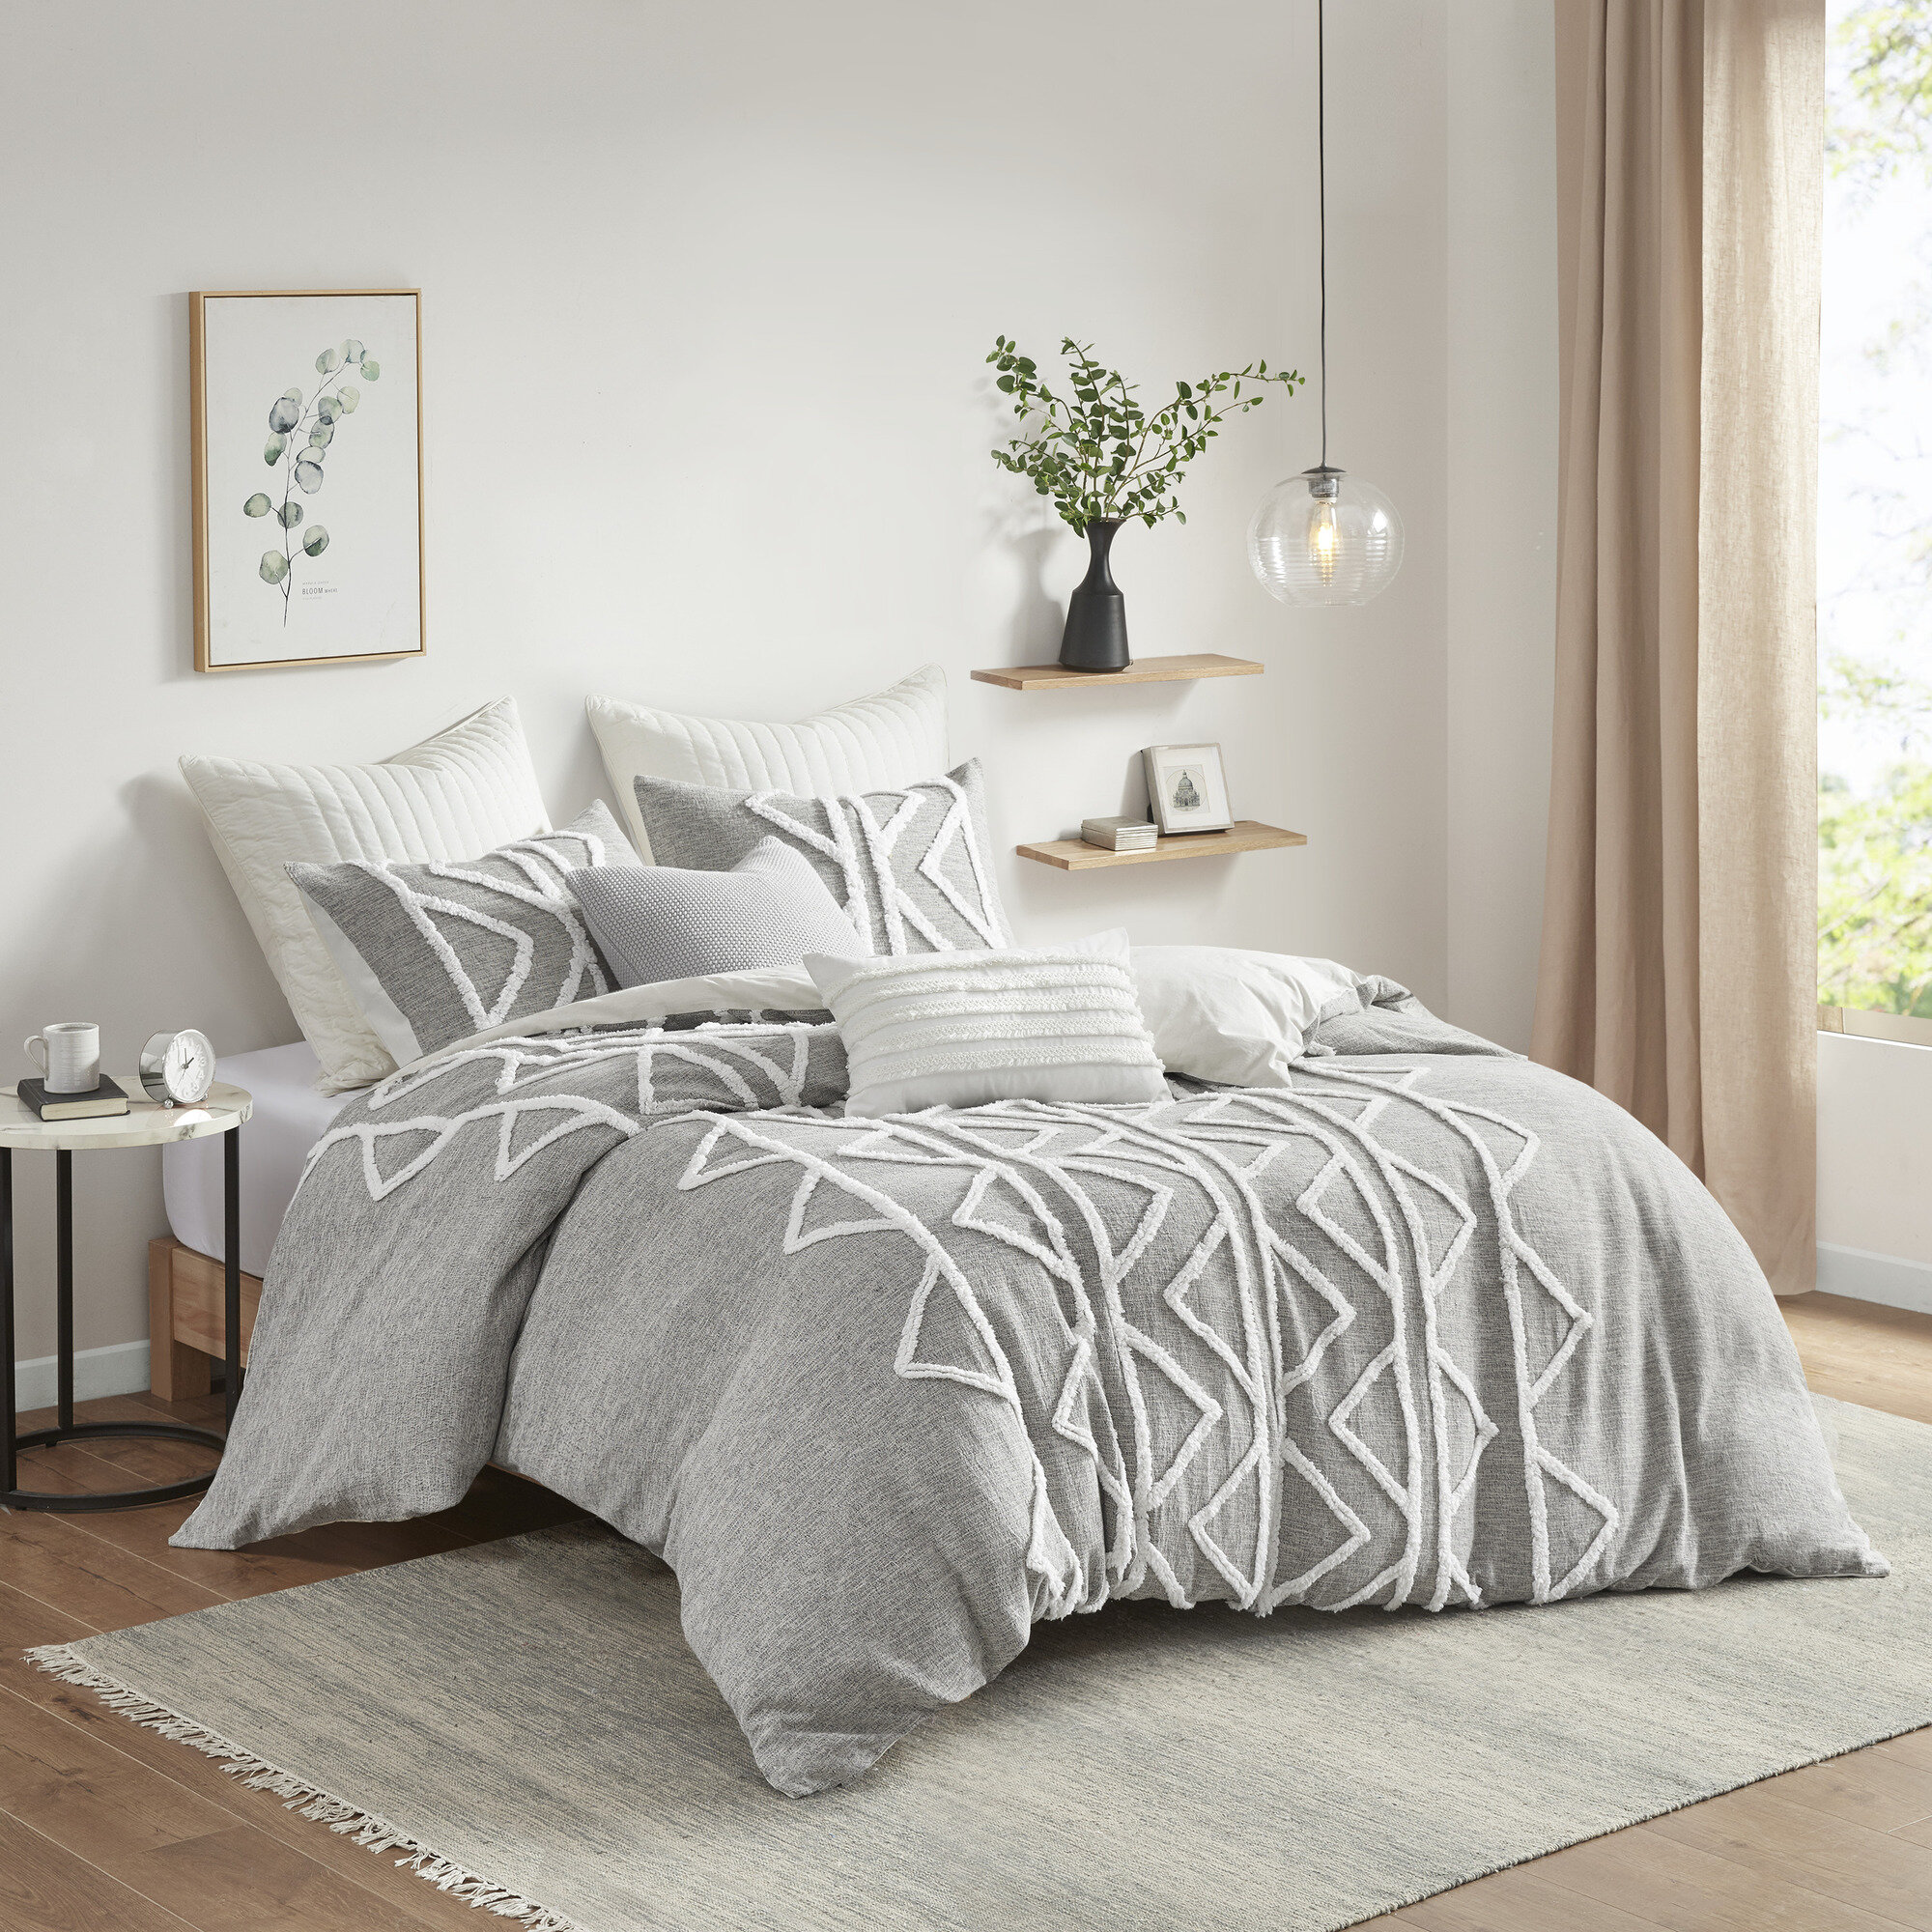 Grey and white bedding